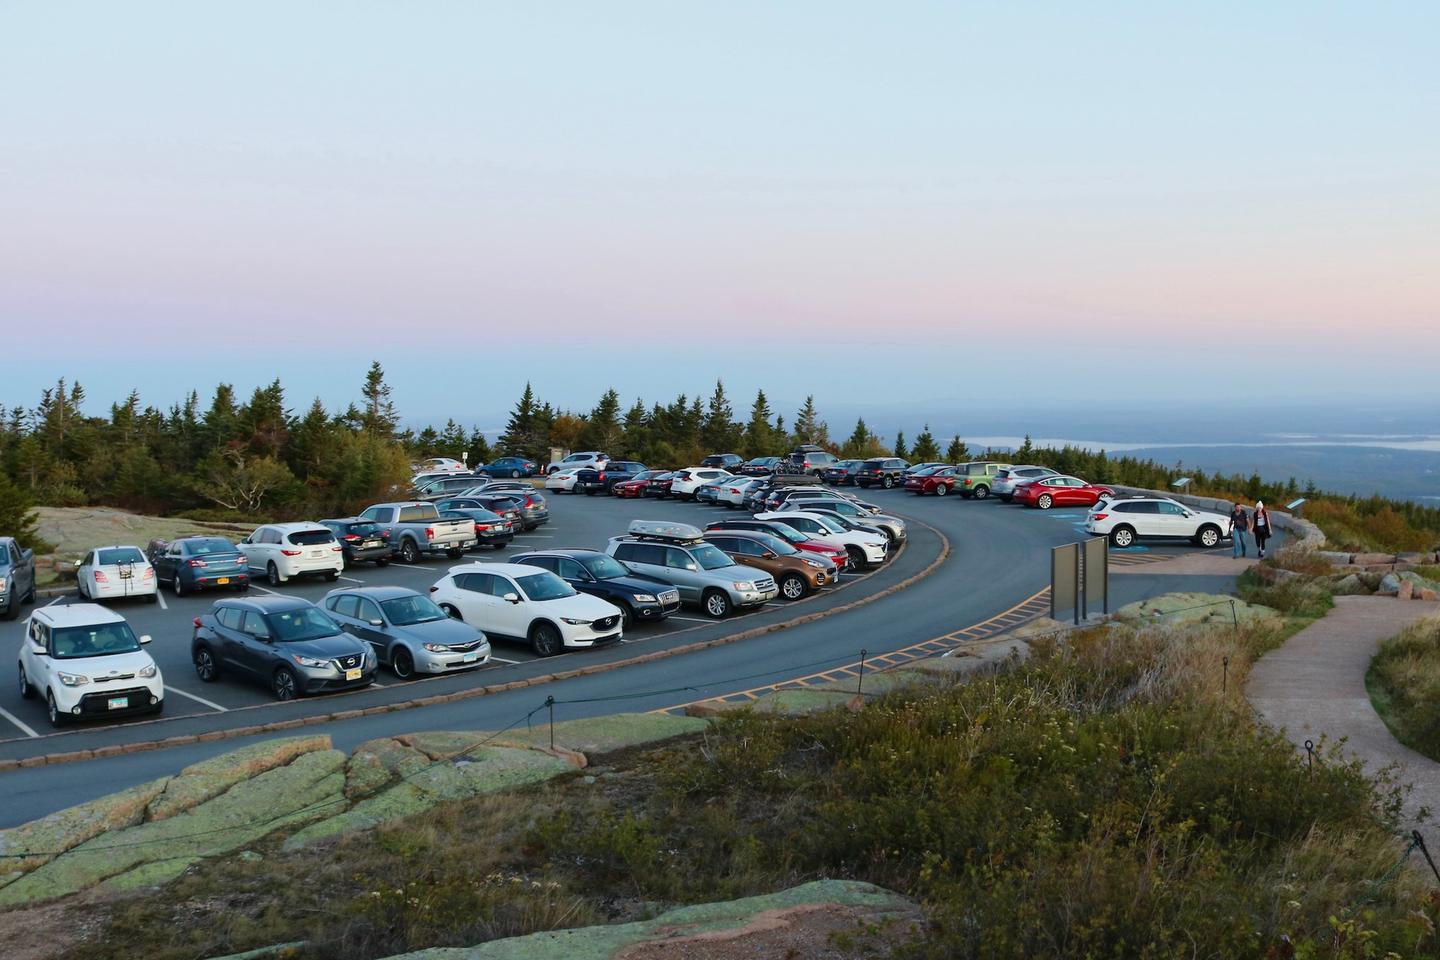 A full parking area on the top of Cadillac Mountain in low light at sunrise surrounded by trees and granite ledges.Parking for sunrise at the Cadillac Summit.